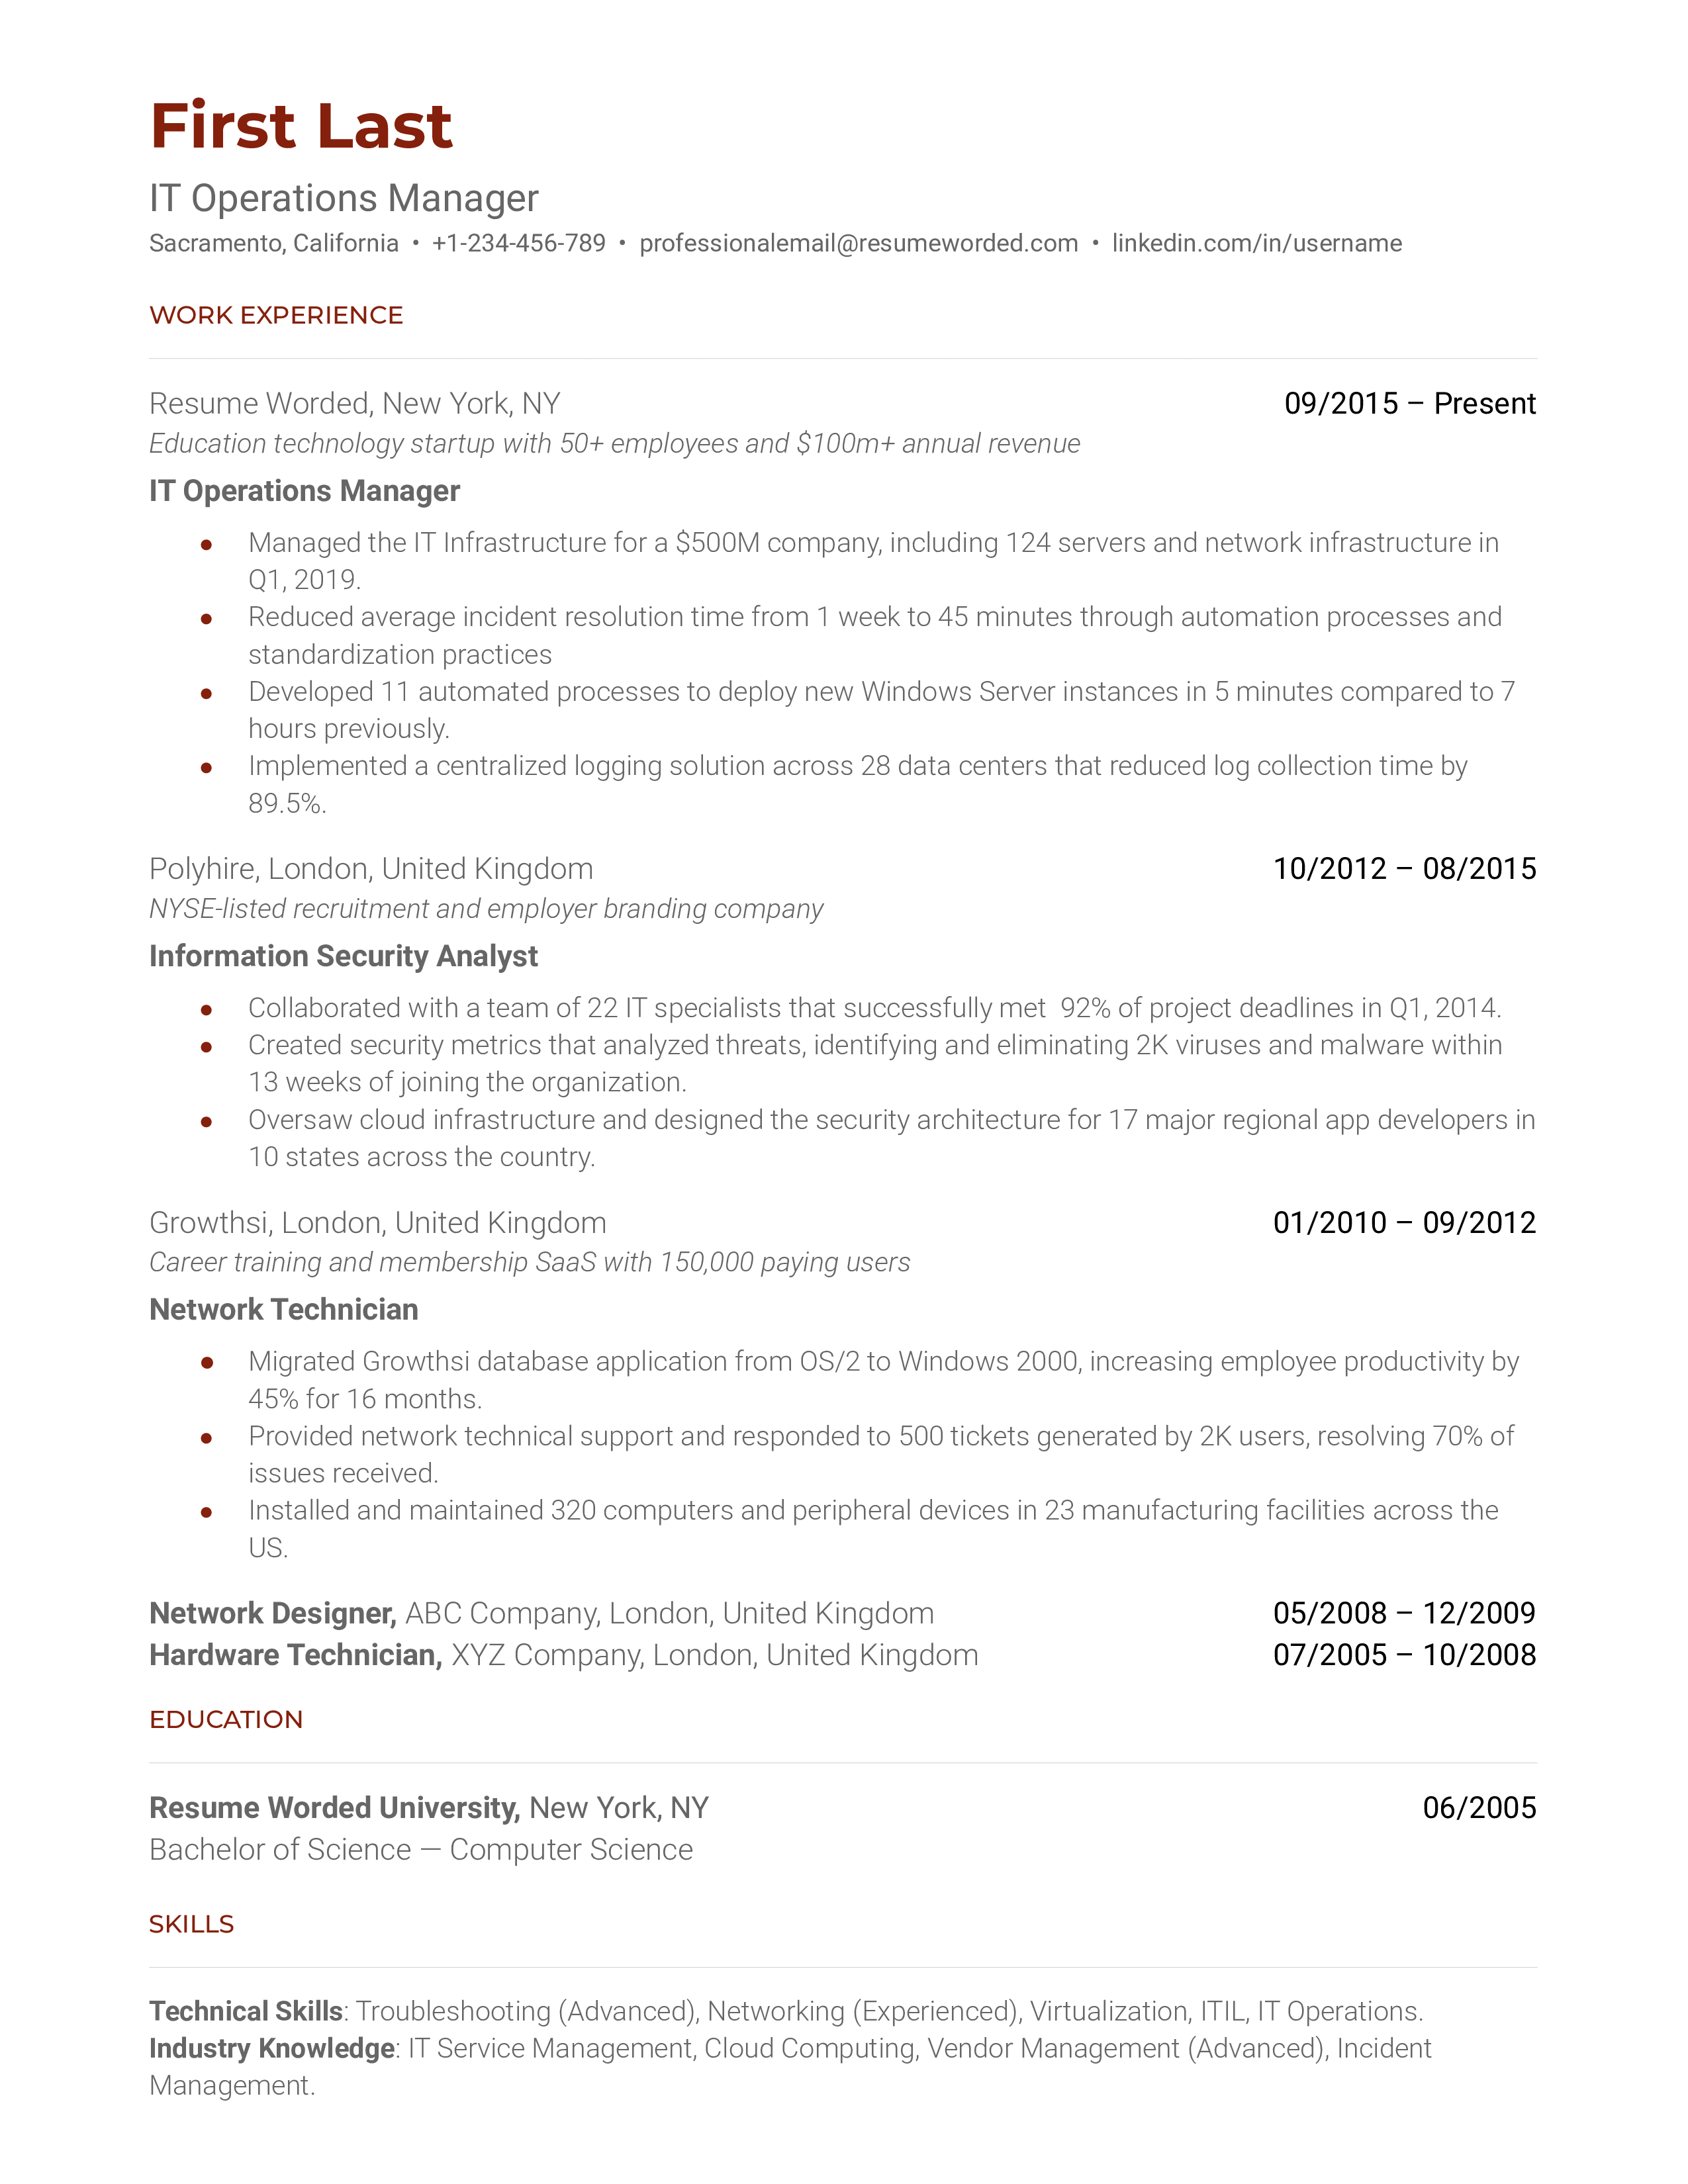 An IT operations manager resume sample that highlights the applicant’s IT experience and qualifications.